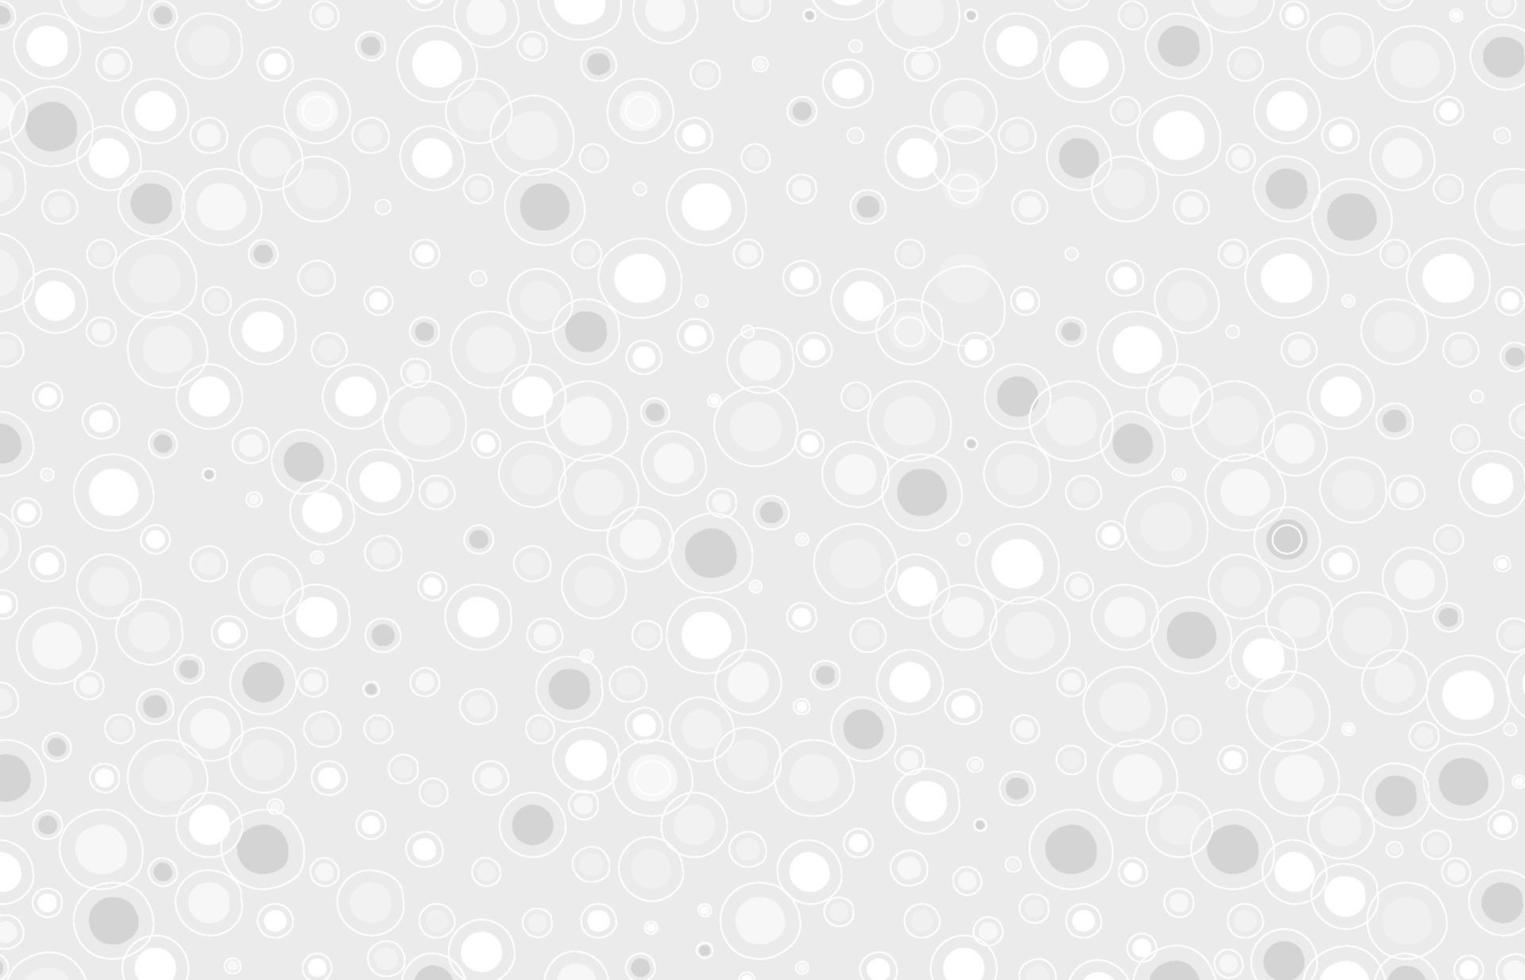 Abstract dots doodle pattern design of artwork decorative template. Overlapping white simple background. Illustration vector